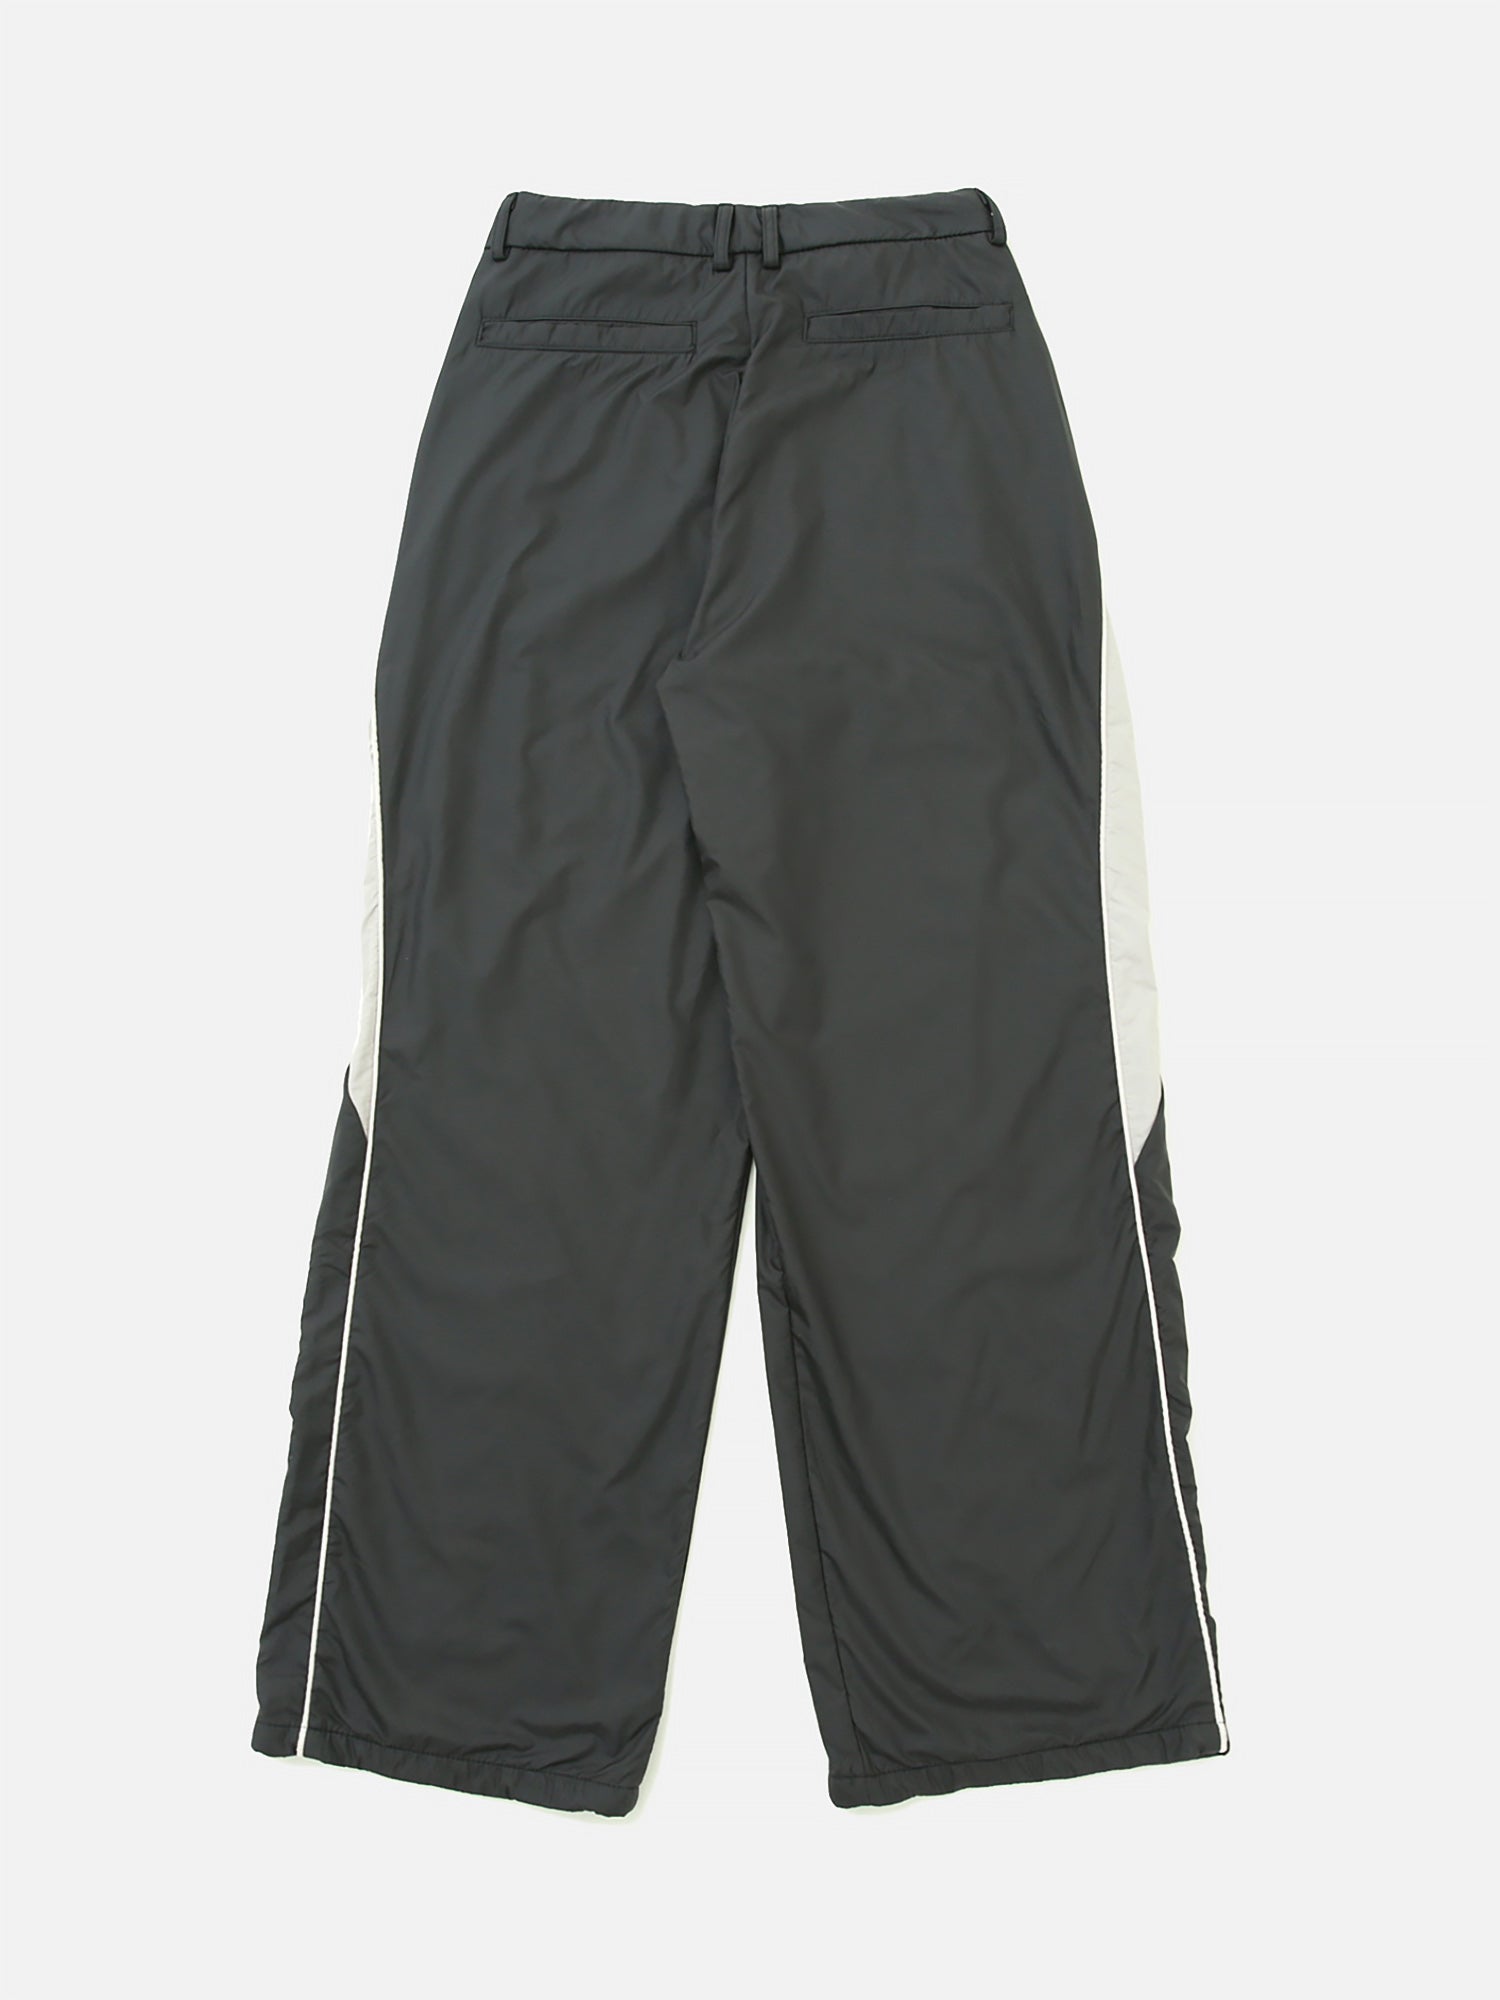 Thesupermade American Street Style Spliced Casual Trousers